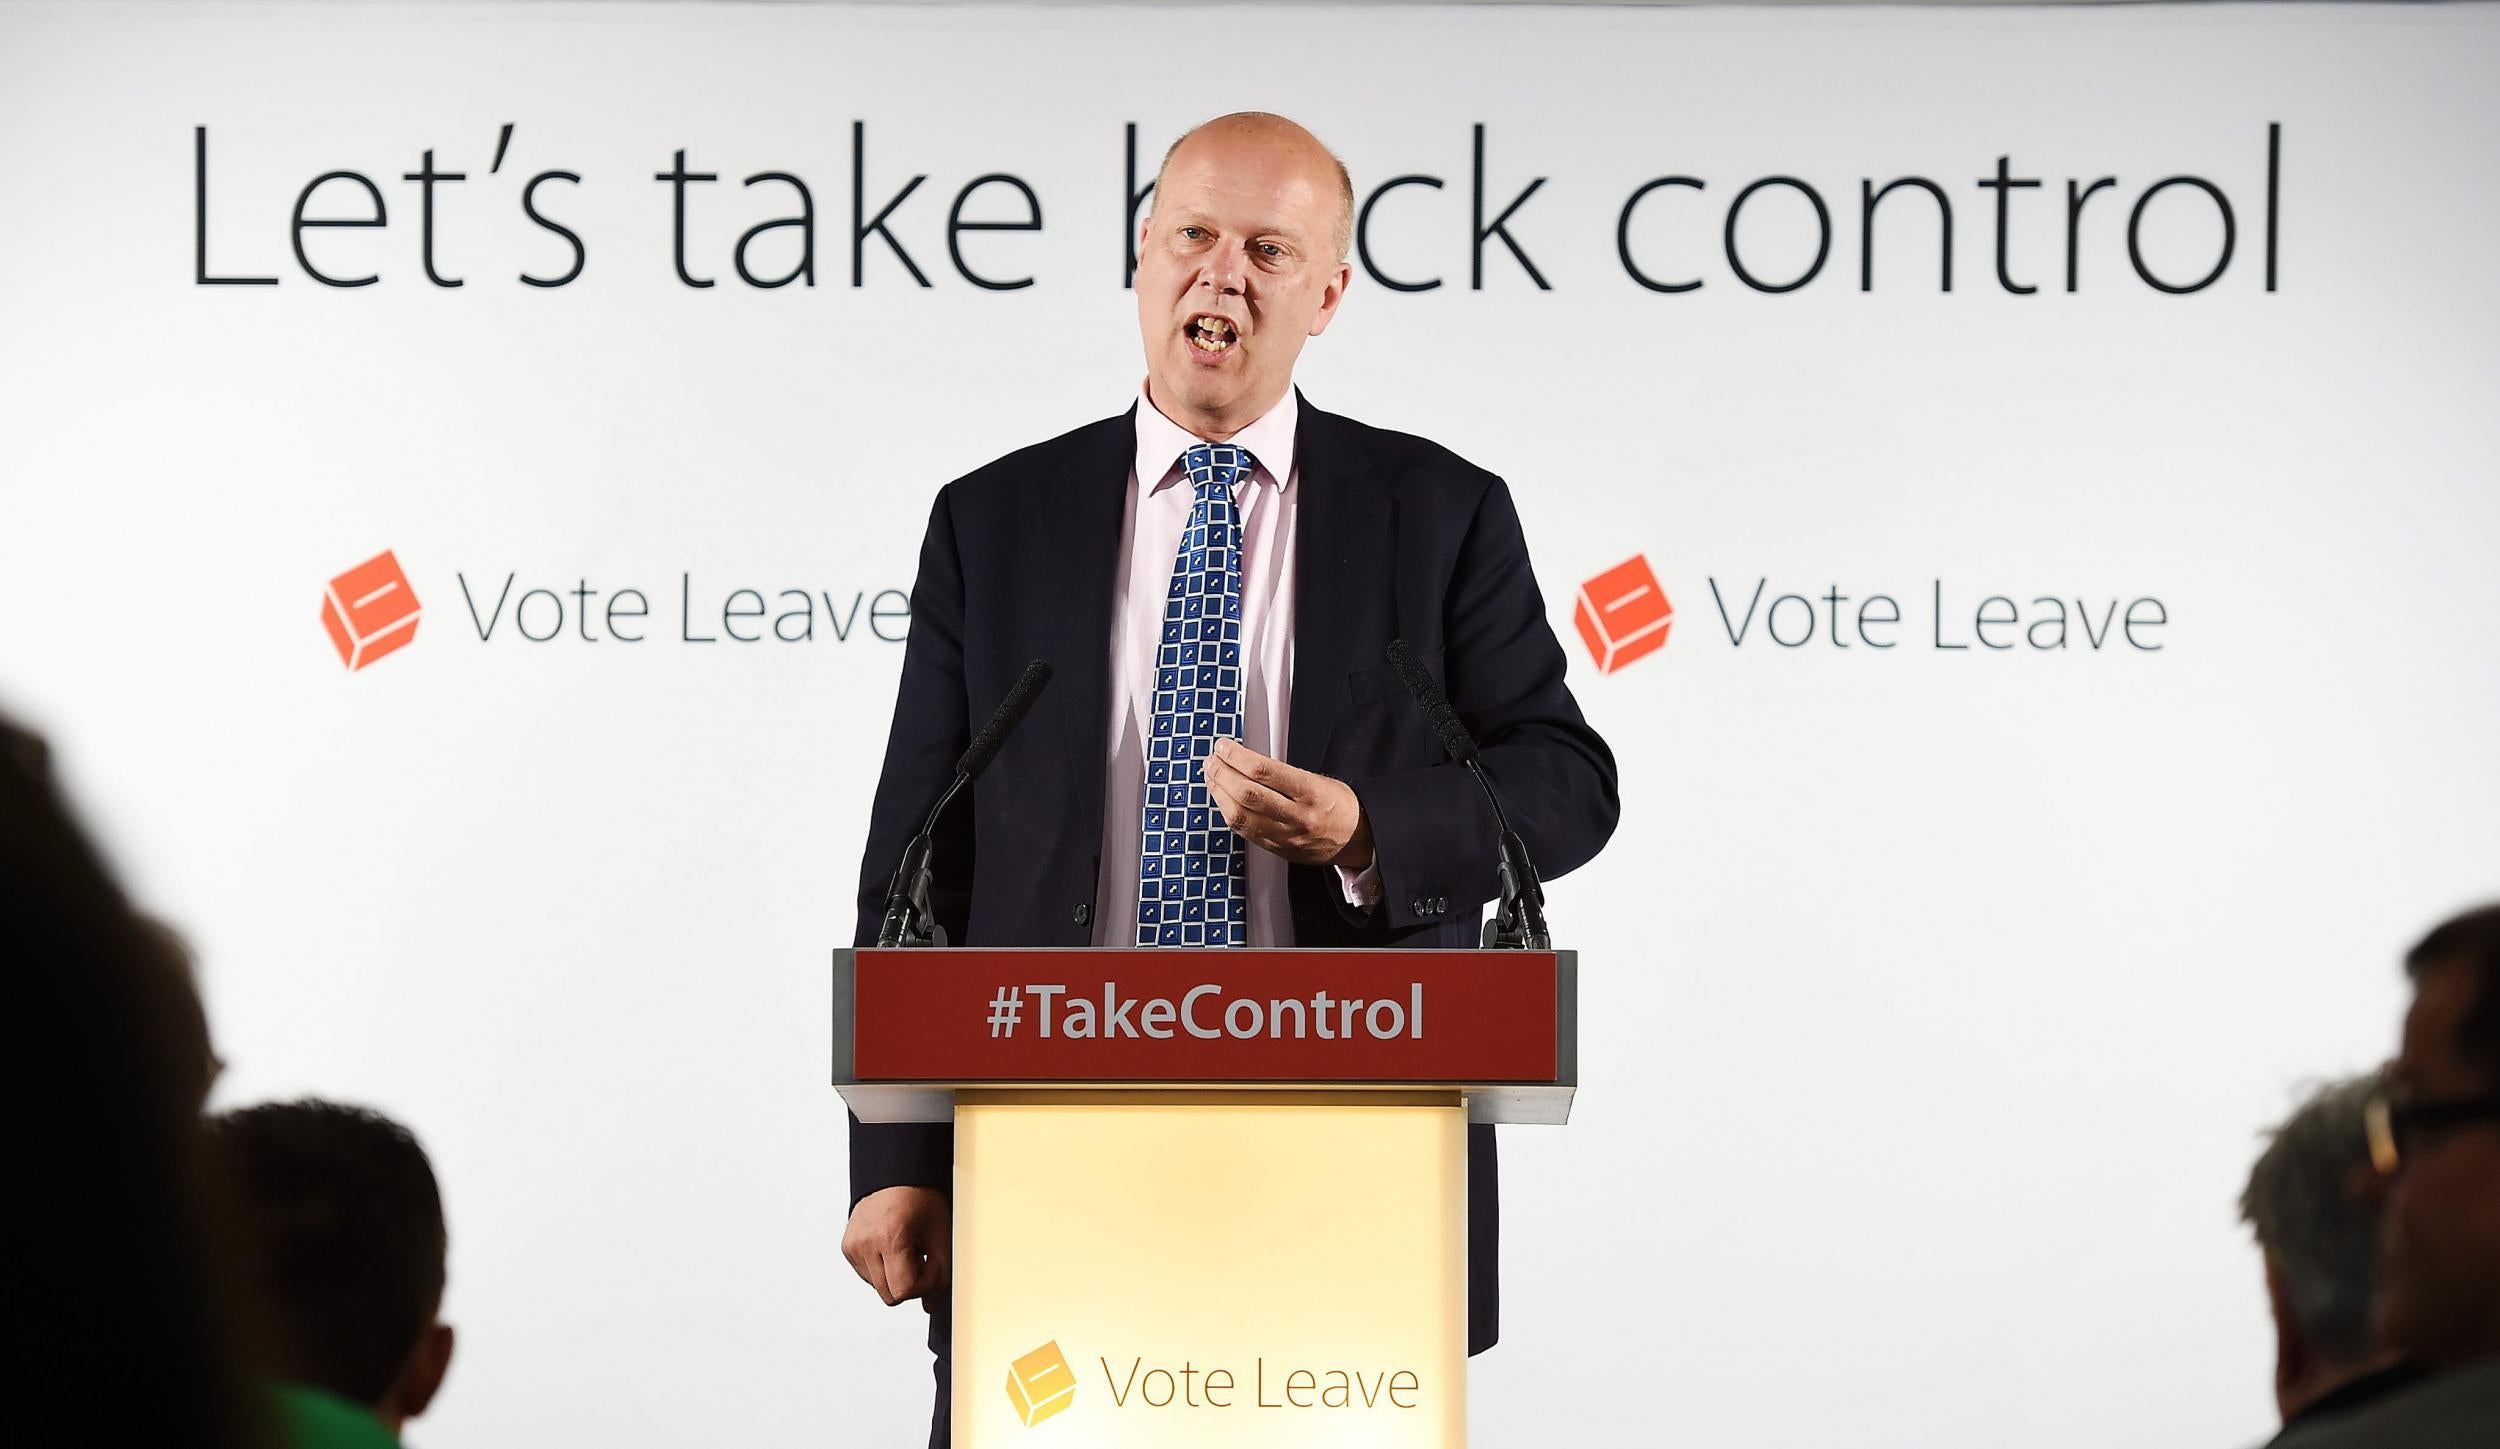 Leader of the House of Commons Chris Grayling delivers a speech at the Vote Leave campaign headquarters in London